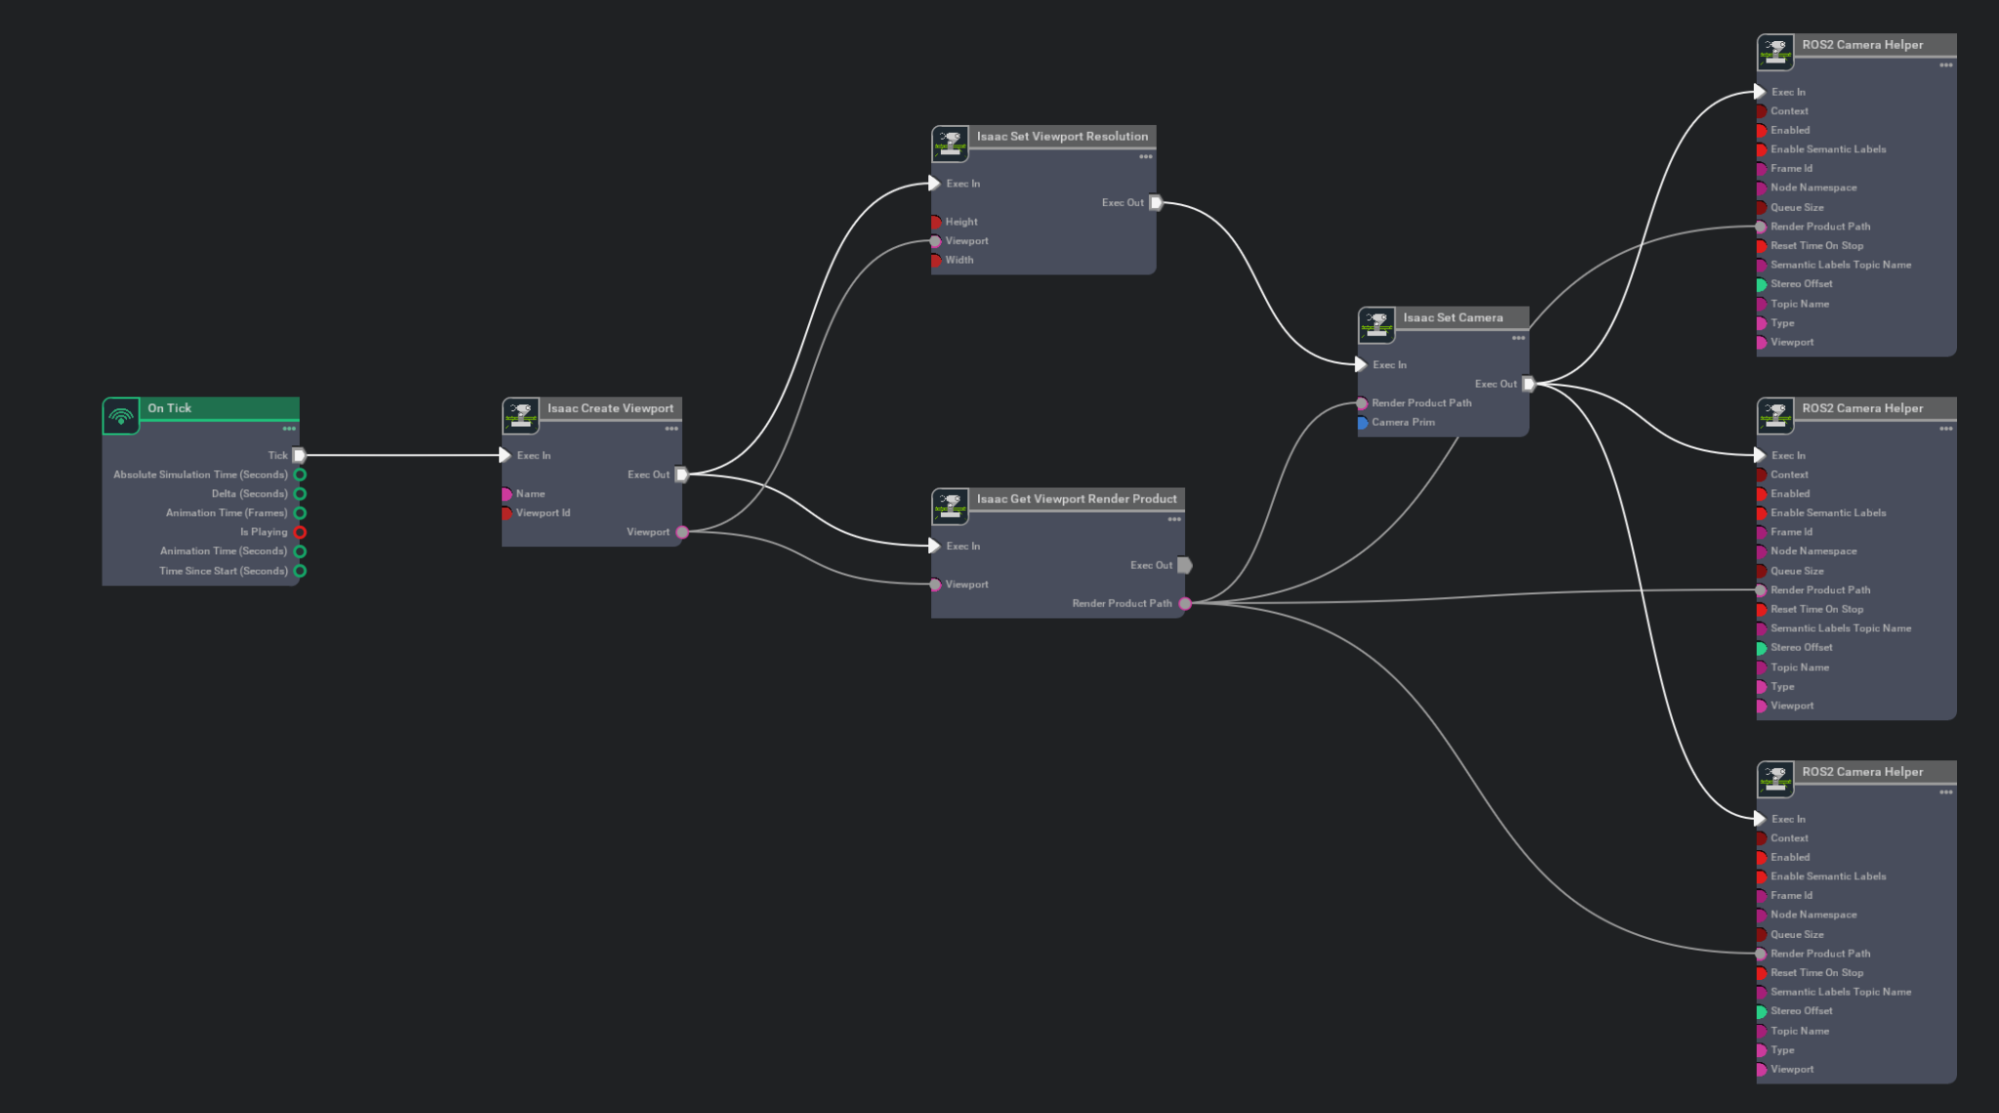 A screenshot of the generated graph from script.